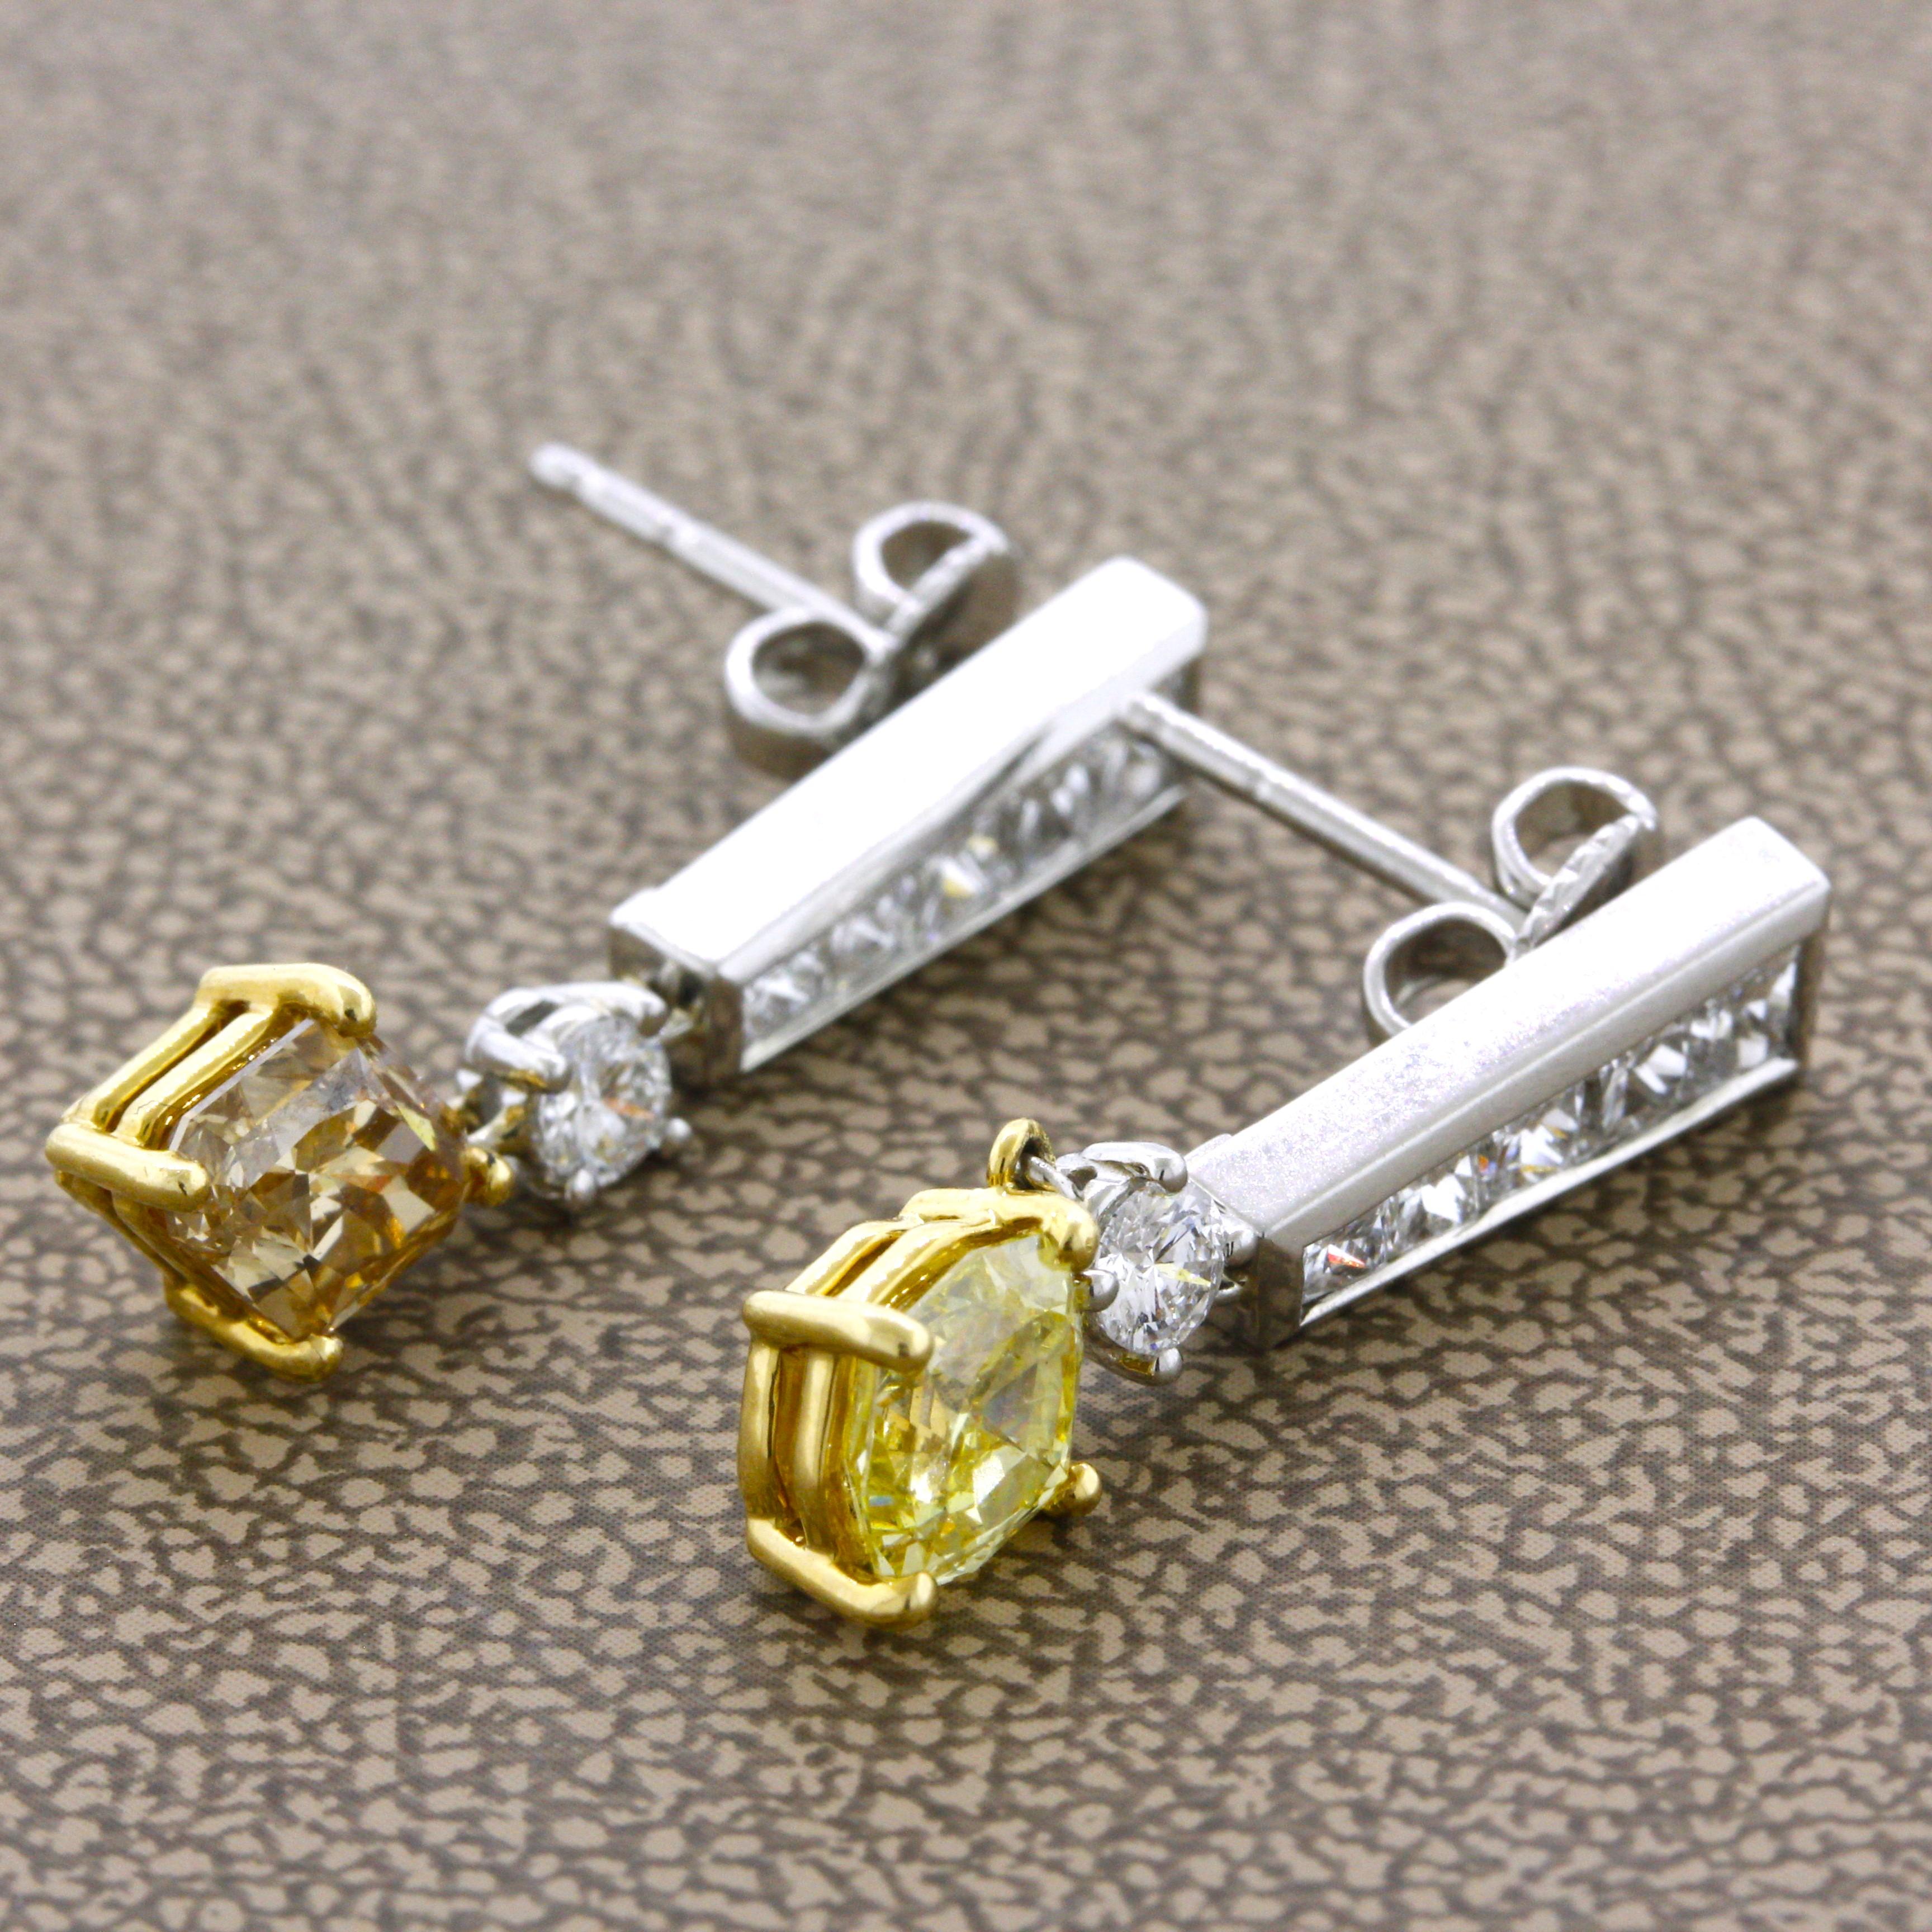 A lovely pair of miss-matched fancy colored diamond earrings. They feature 2 fancy colored diamonds with a specialty diamond-cut weighting 1.77 carats total. One of the diamonds has a bright fancy yellow color while the other is a fancy